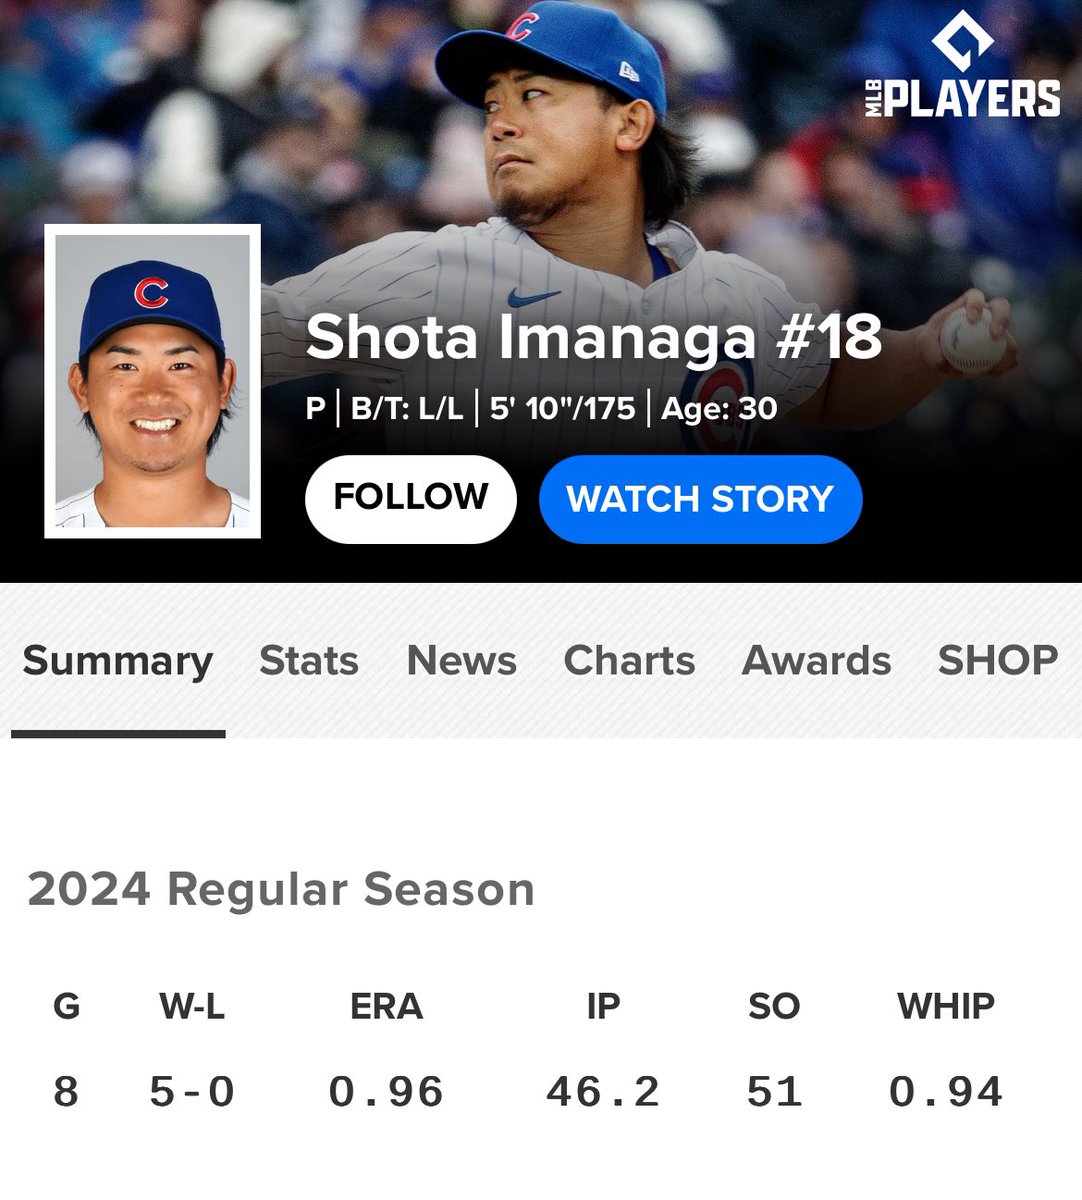 Shota Imanaga was indeed the biggest steal of the entire offseason